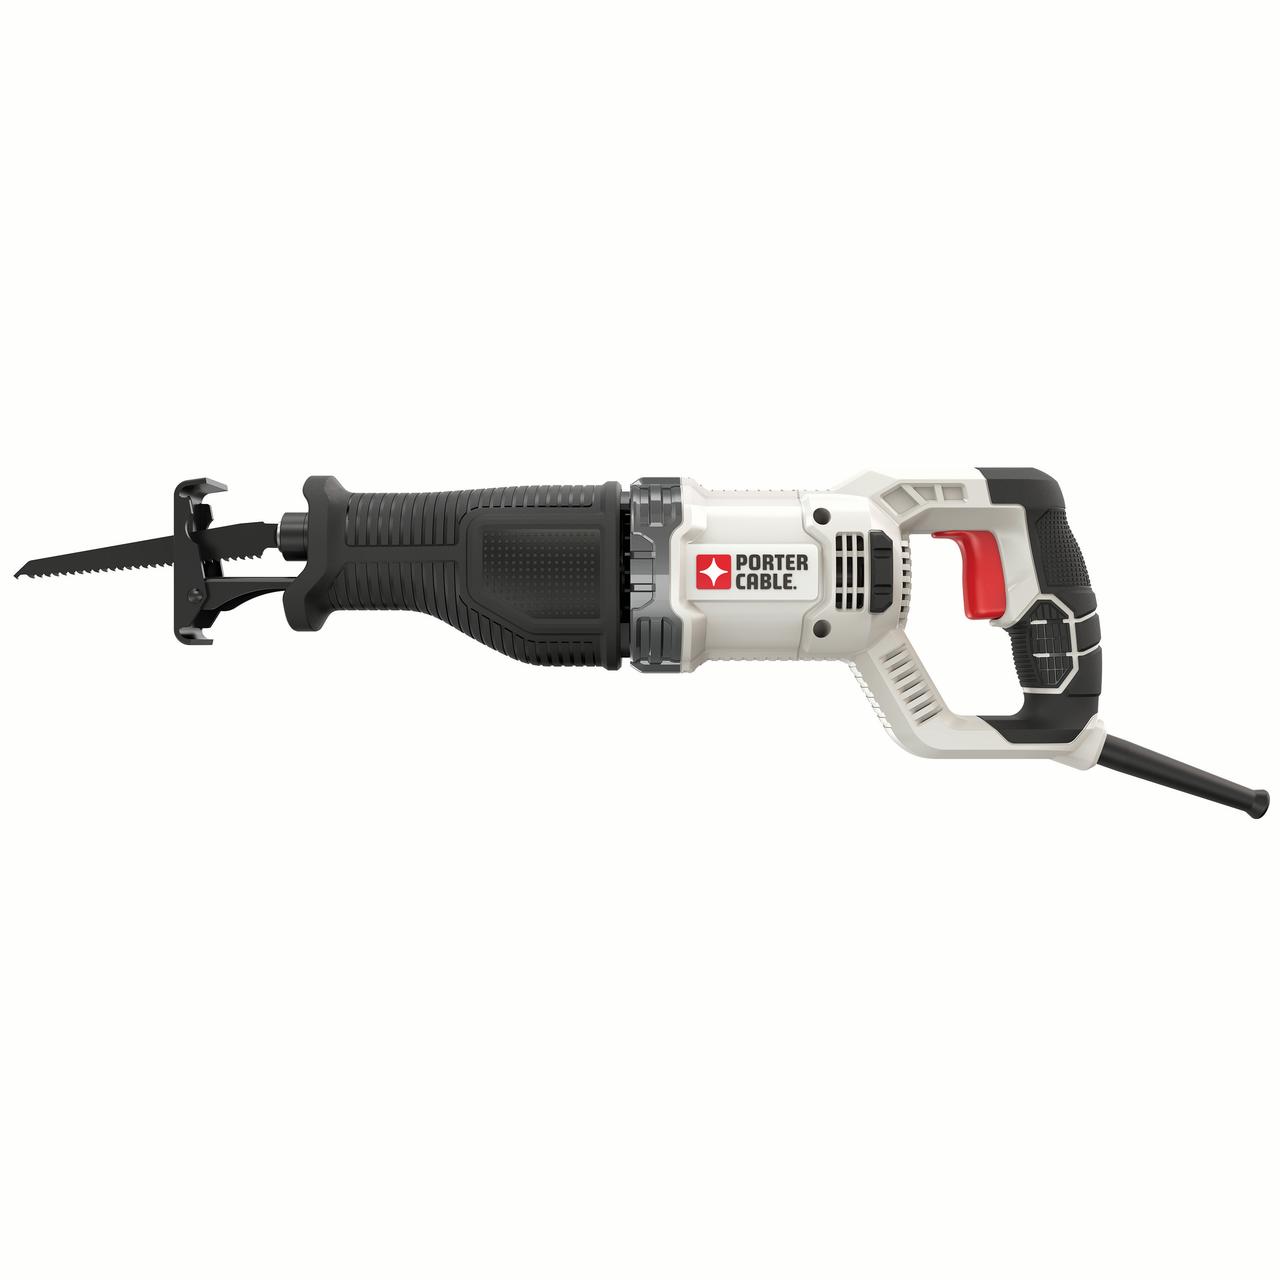 PORTER CABLE PCE360 7.5-Amp Variable Speed Reciprocating Saw